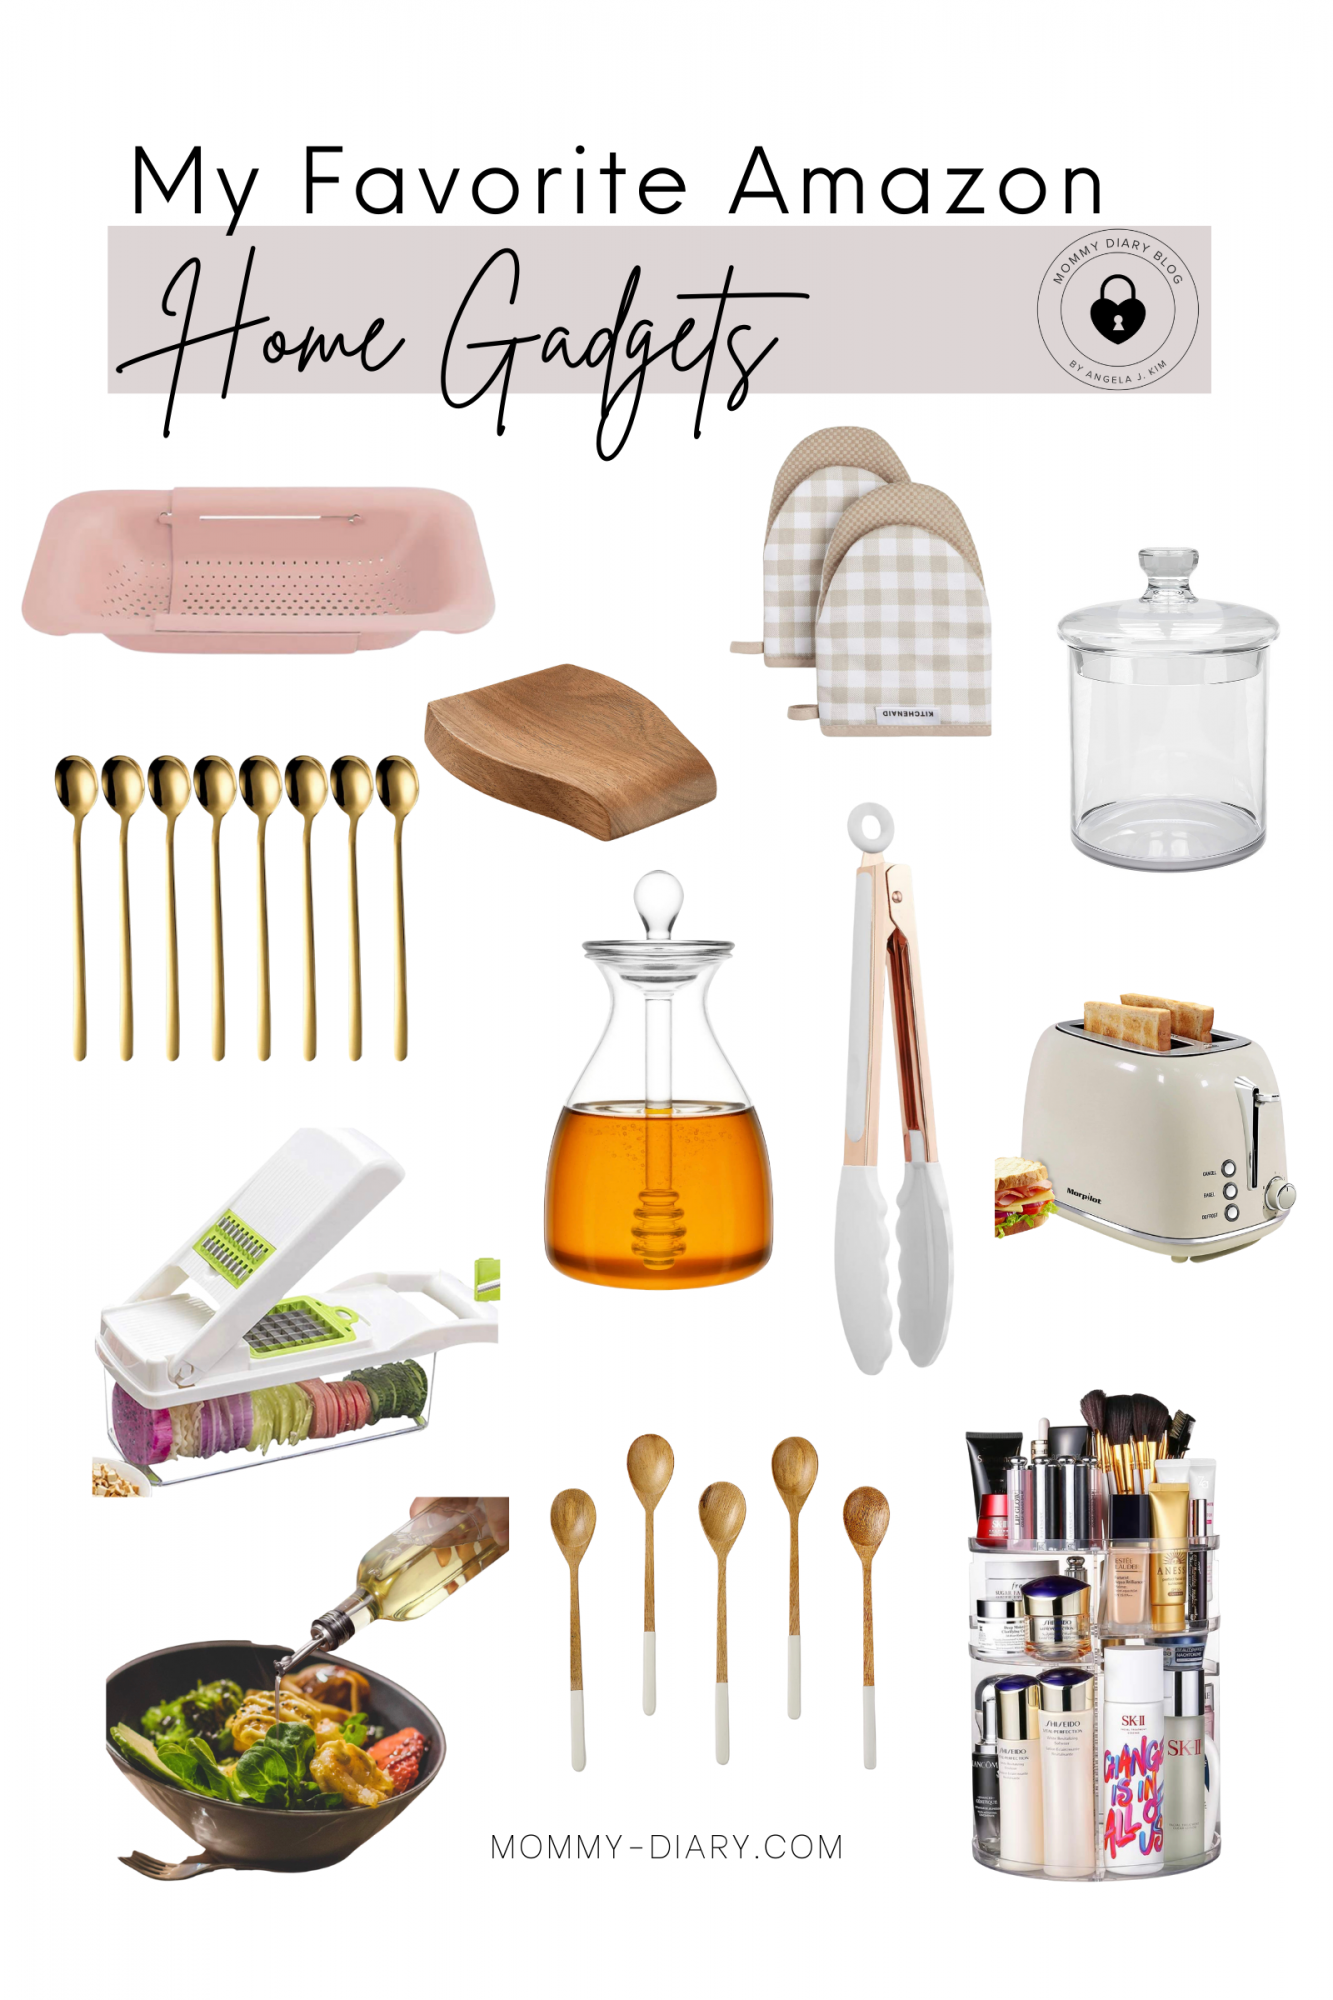 My Favorite Amazon Home Kitchen Gadgets on Mommy Diary Blog.